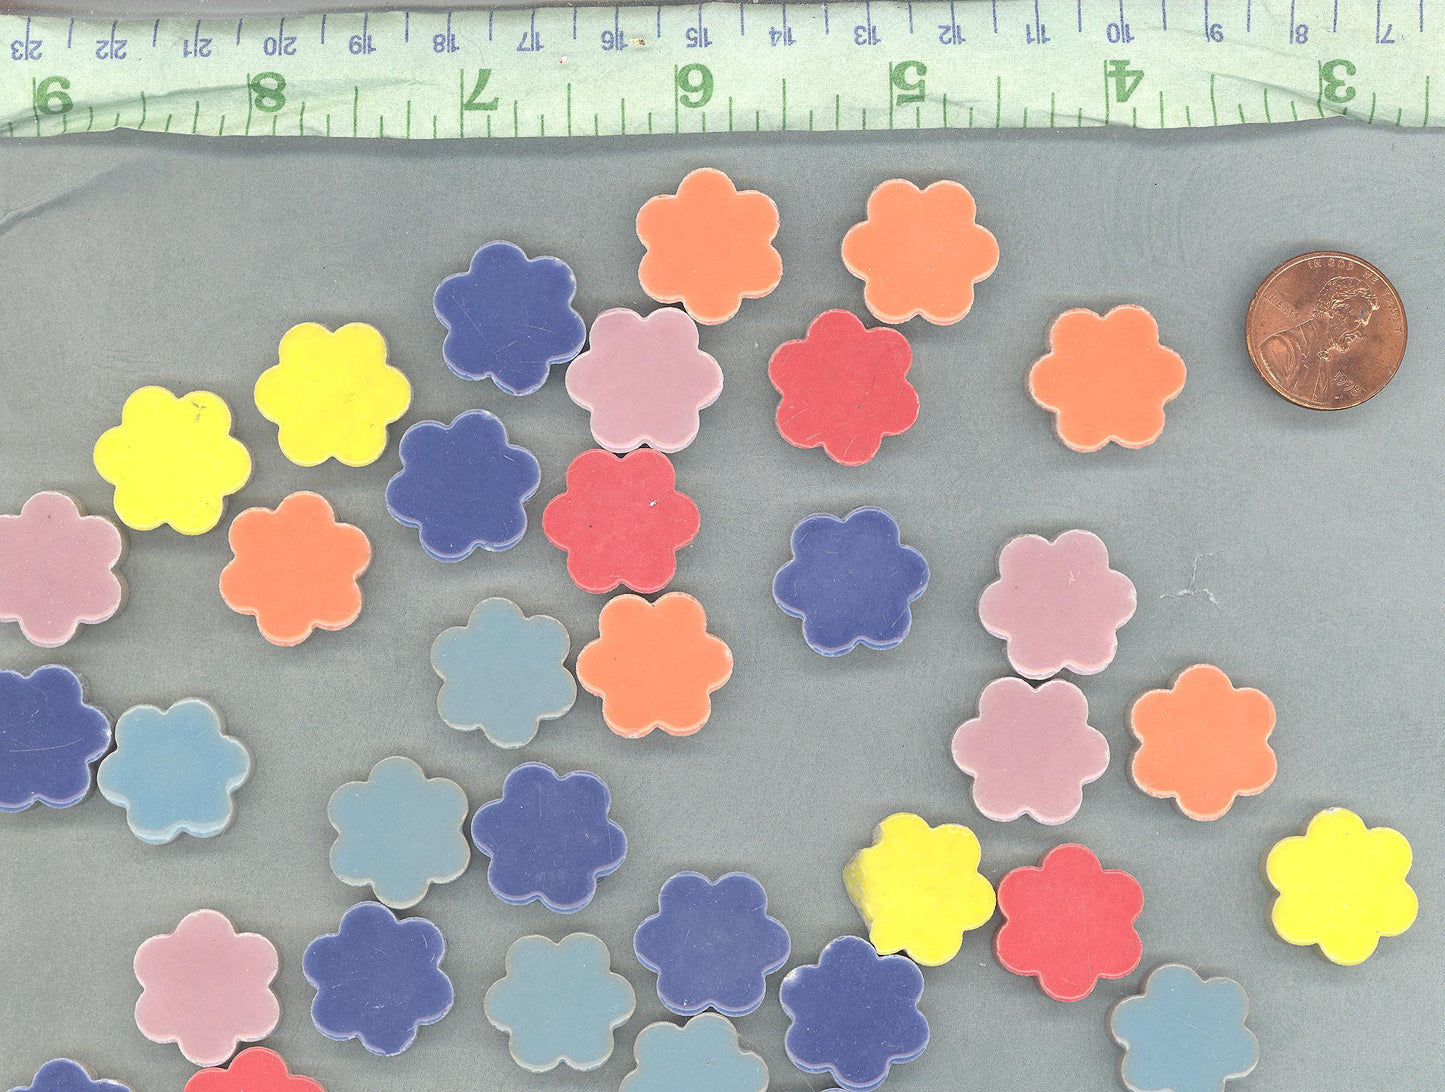 Flower Mosaic Tiles - 50 Ceramic 3/4" Inch Tiles in Assorted Colors